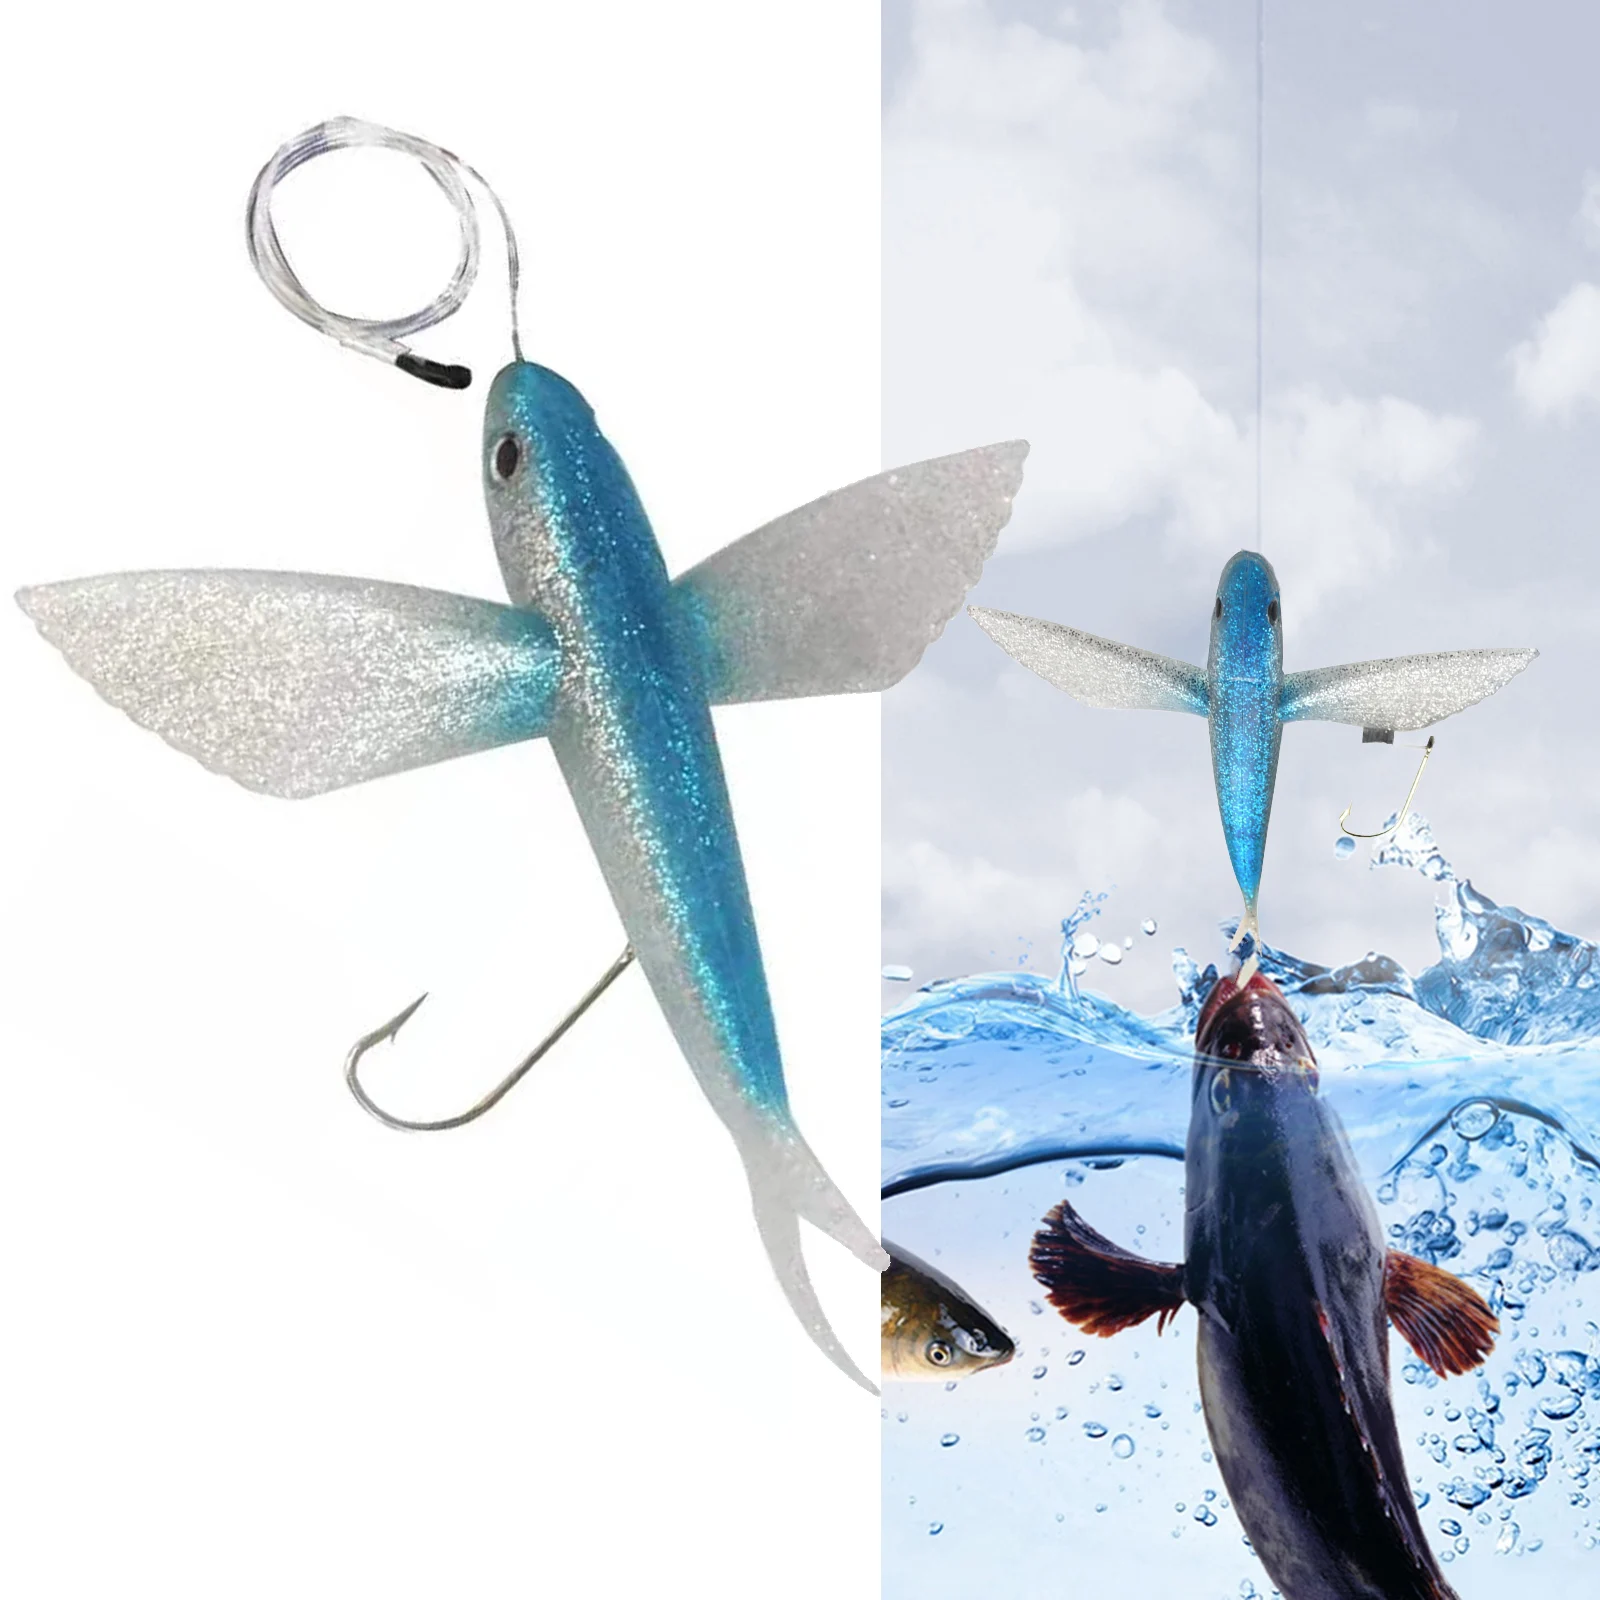 Flying Fish Fishing Trolling Lures Baits,Simulation Flying Fish Bright  Color Waterproof Portable Yummy Tuna Lures with Hook for Marine Tuna  Mackerel